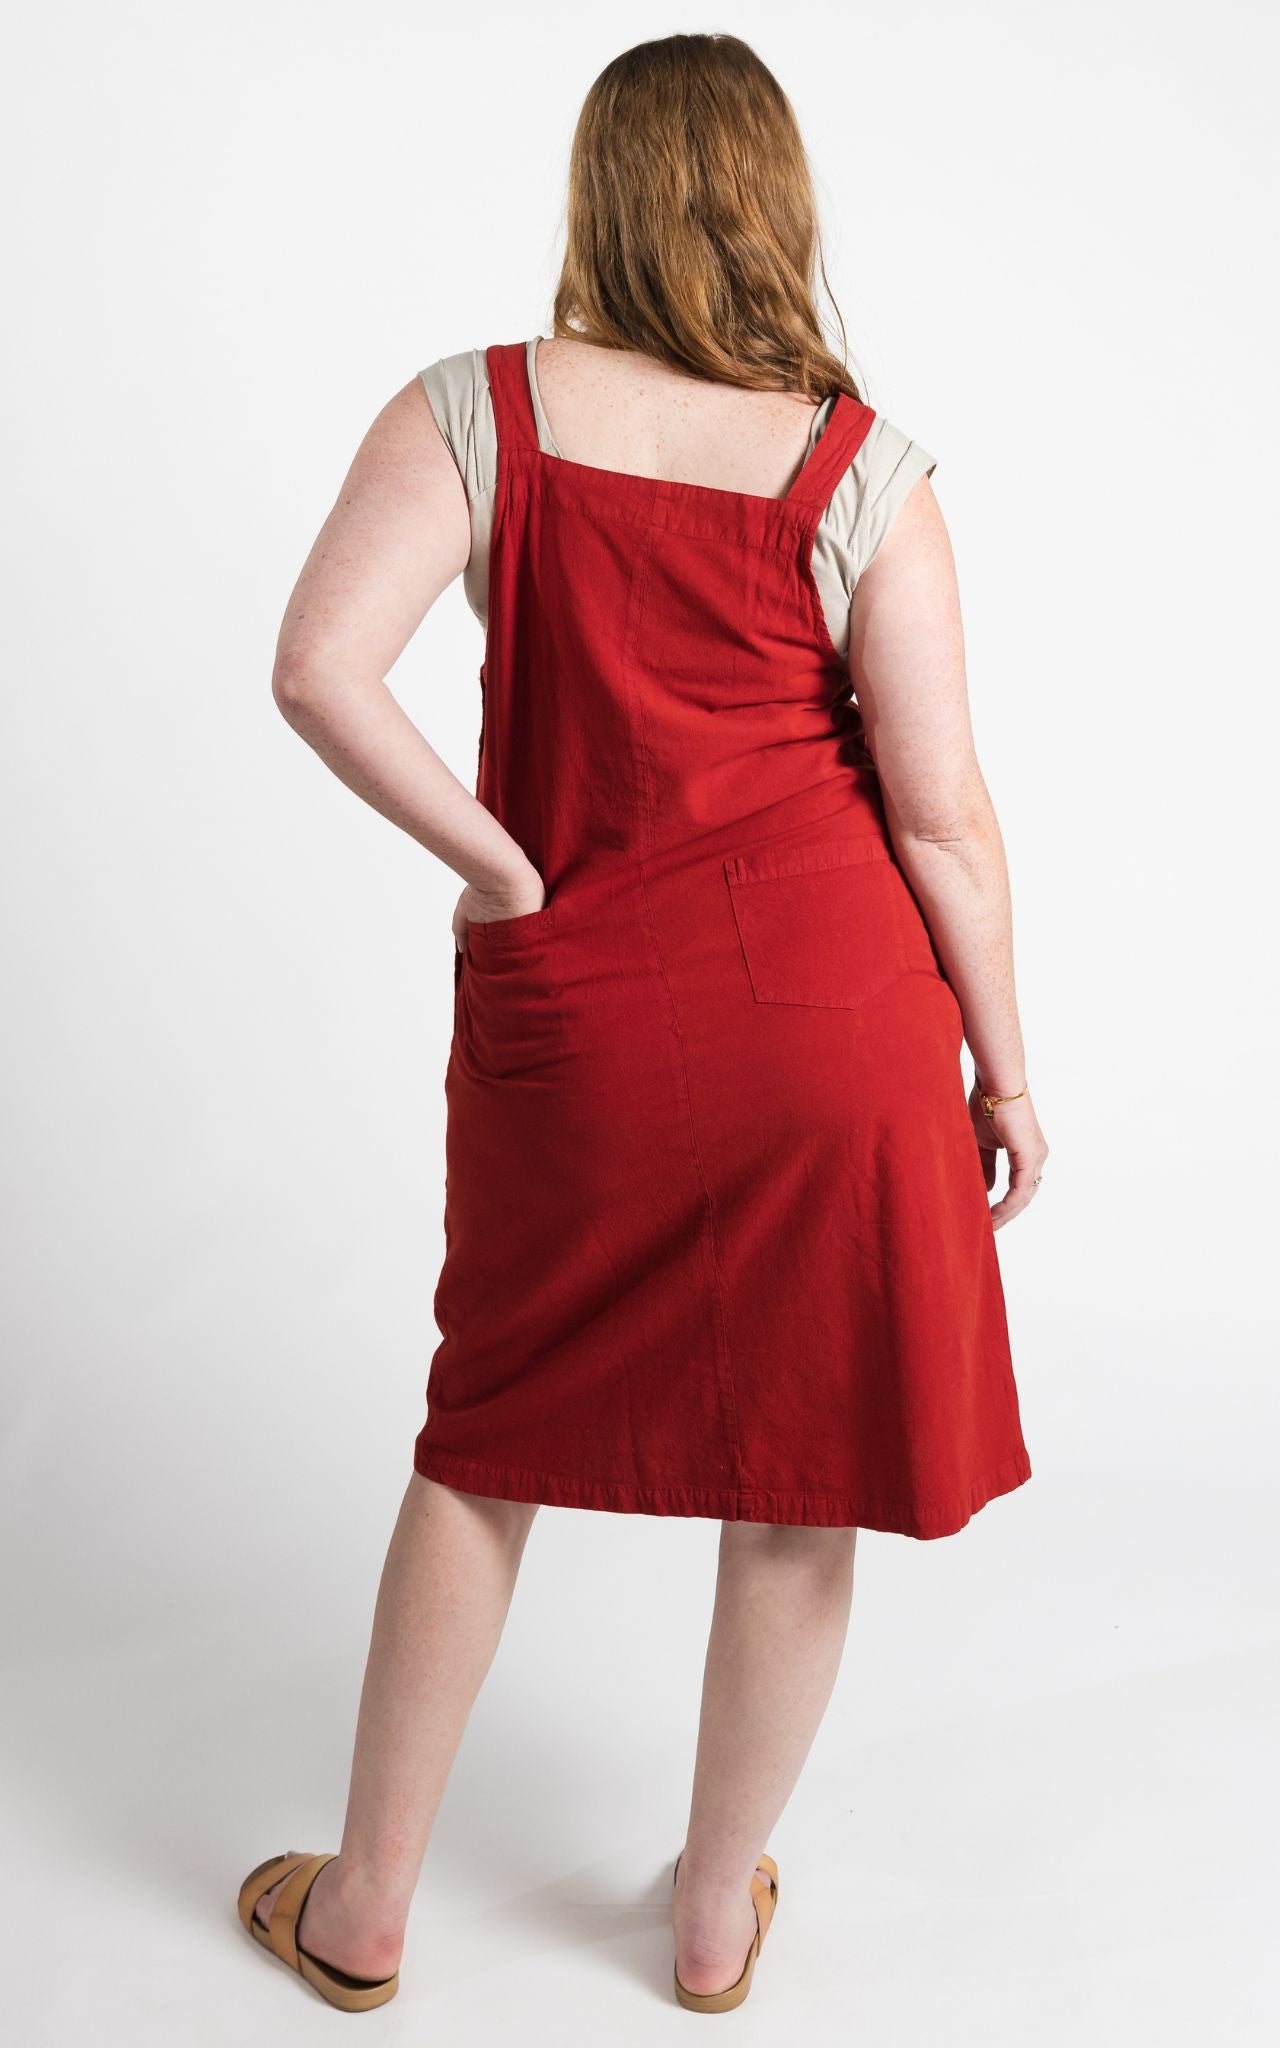 Surya Australia Ethical Cotton 'Ayla' Pinafore made in Nepal - Rust